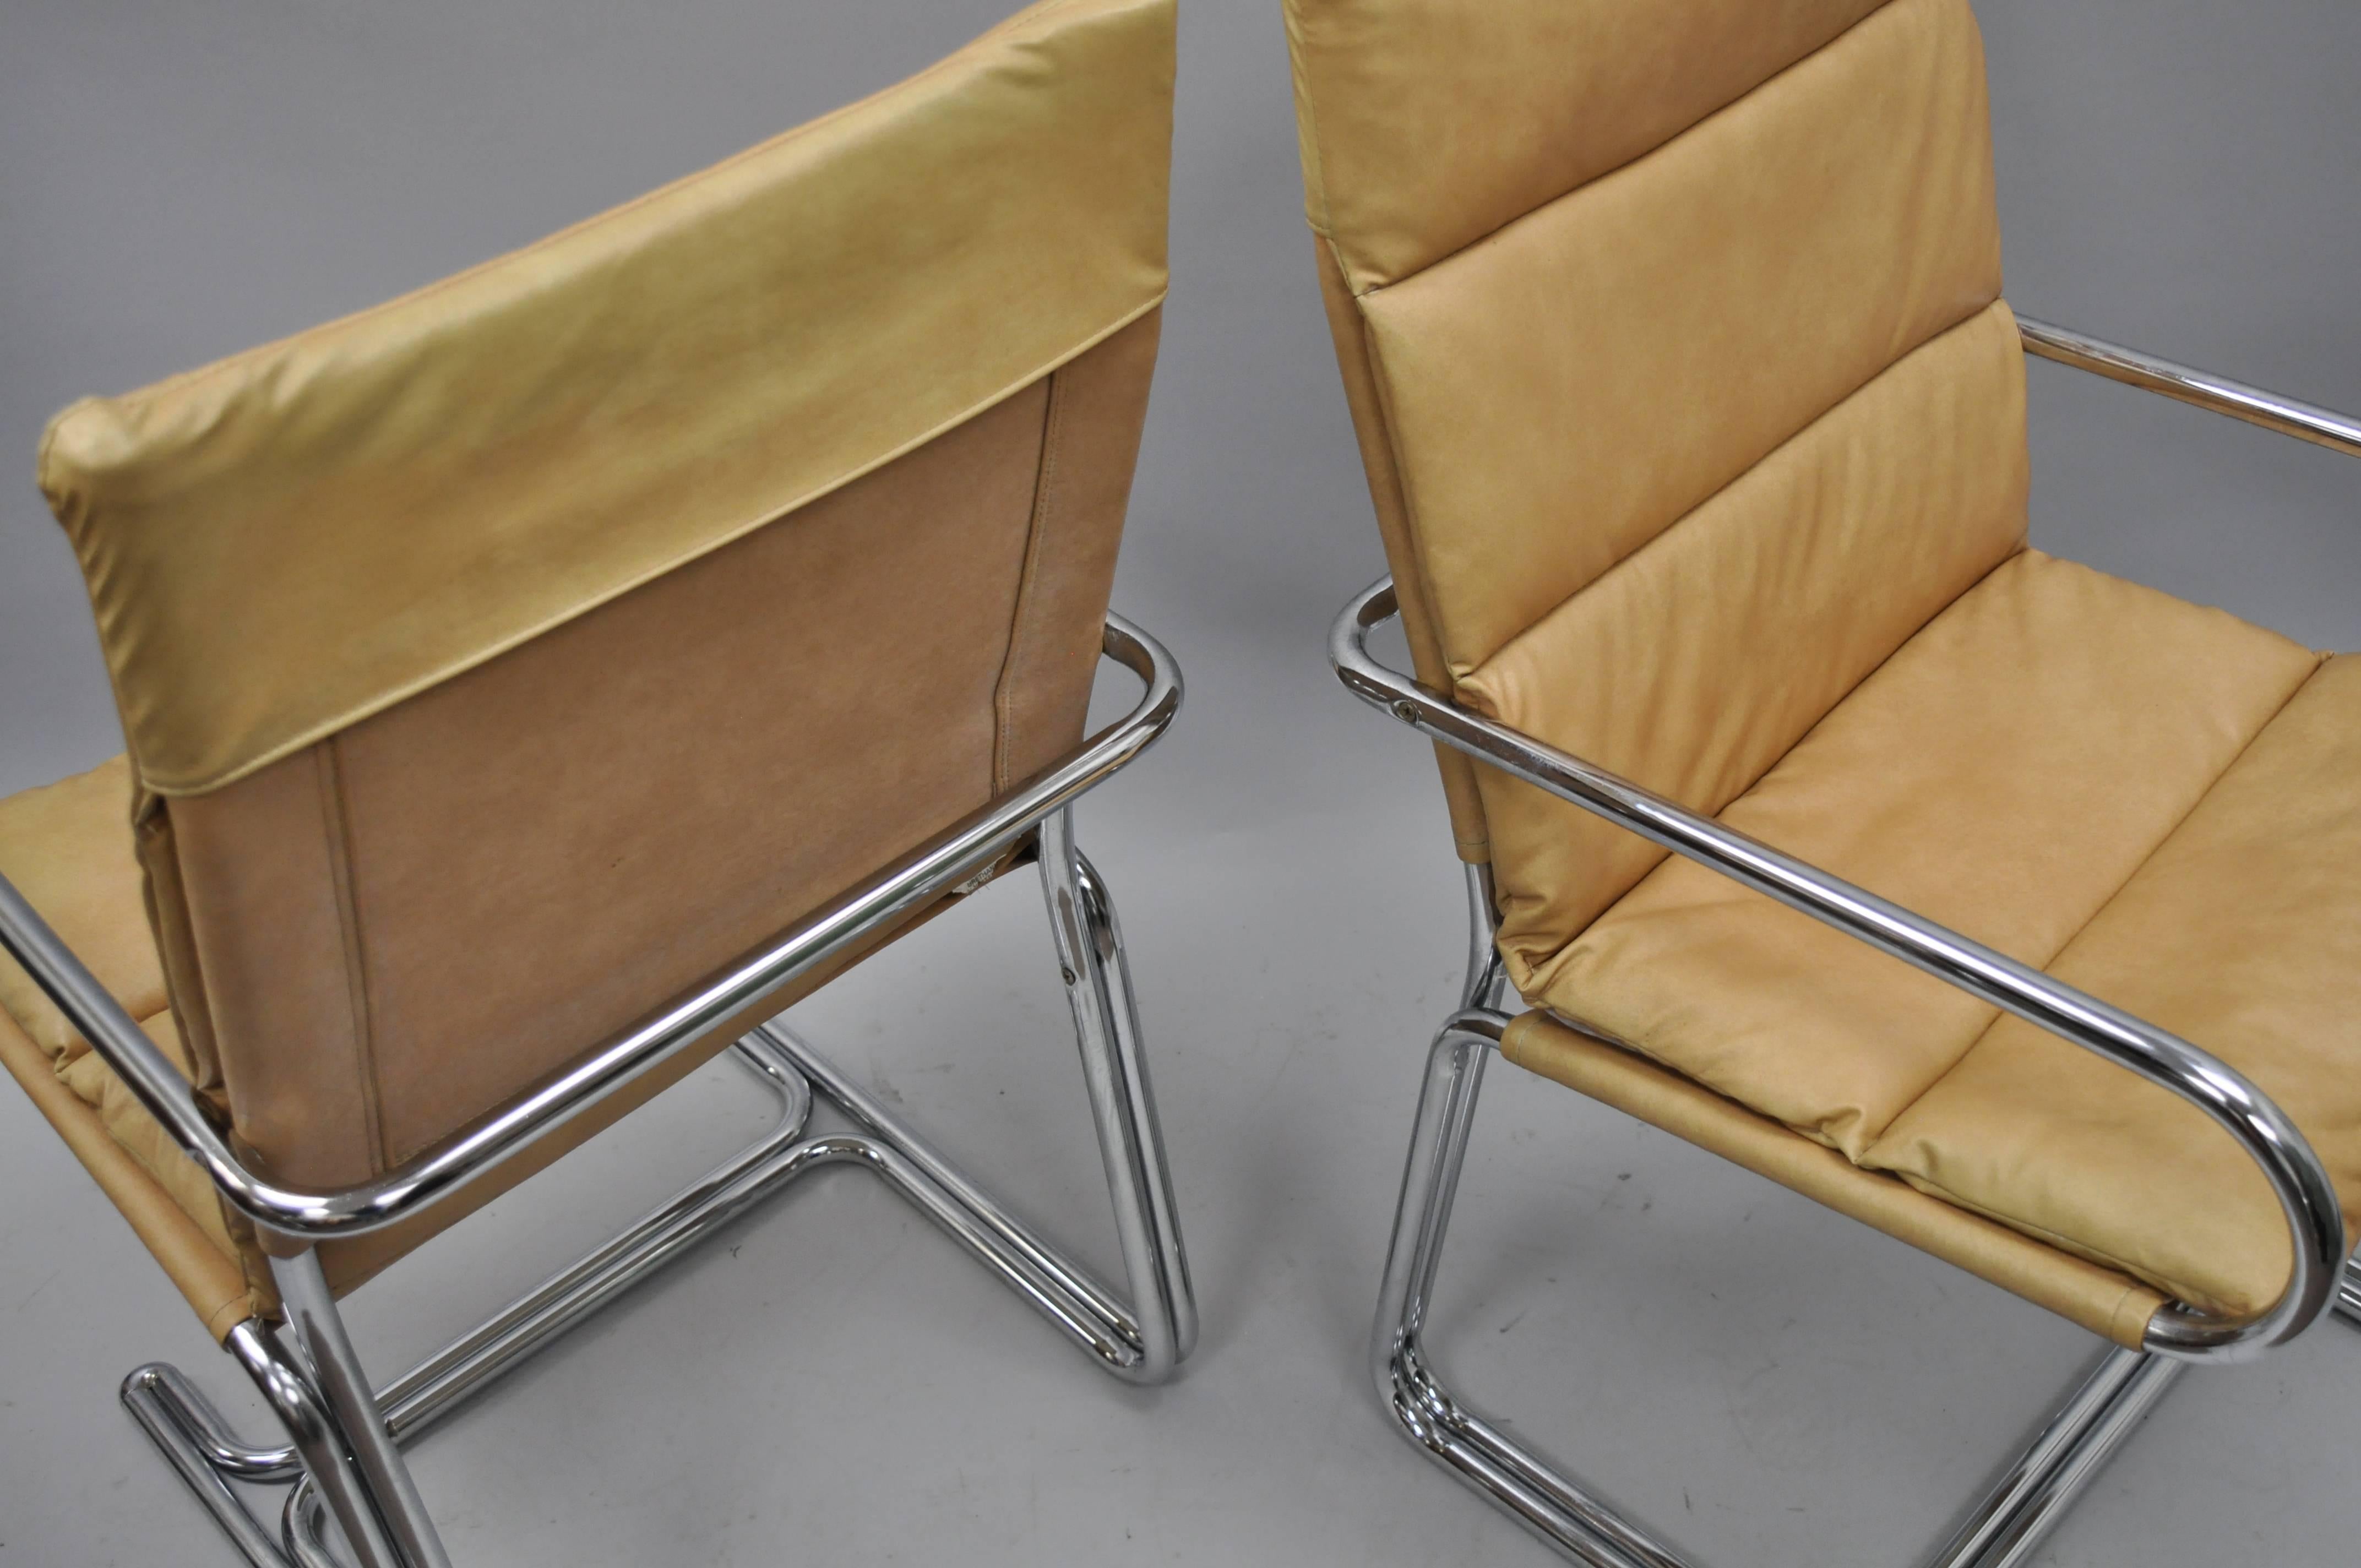 Upholstery Four Tubular Chrome Cantilever Style Arm Chairs by Cosco Inc after Milo Baughman